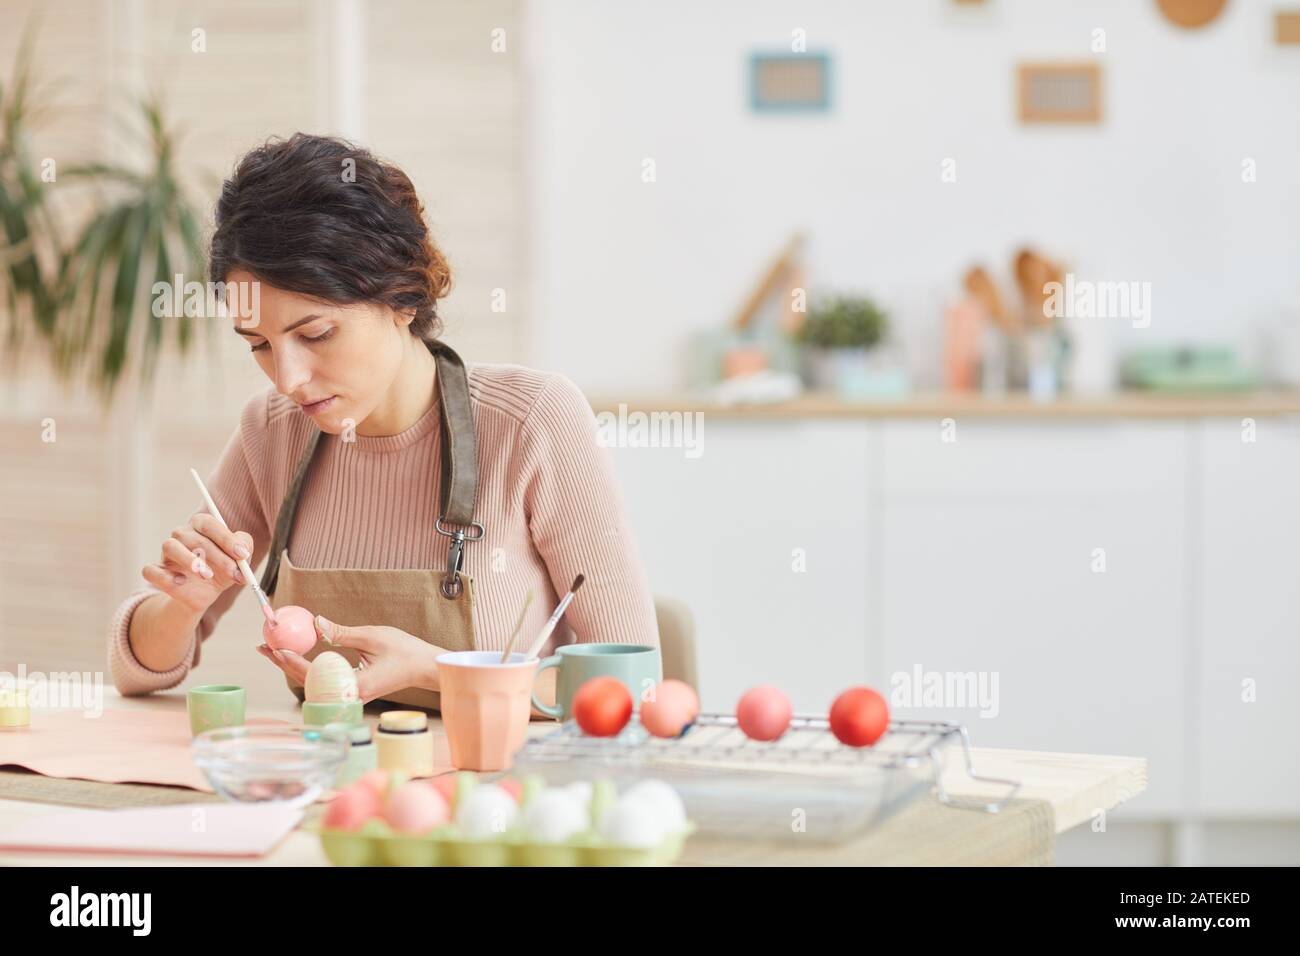 Portrait of adult woman painting eggs in pastel colors for Easter while sitting at table in cozy kitchen interior, copy space Stock Photo